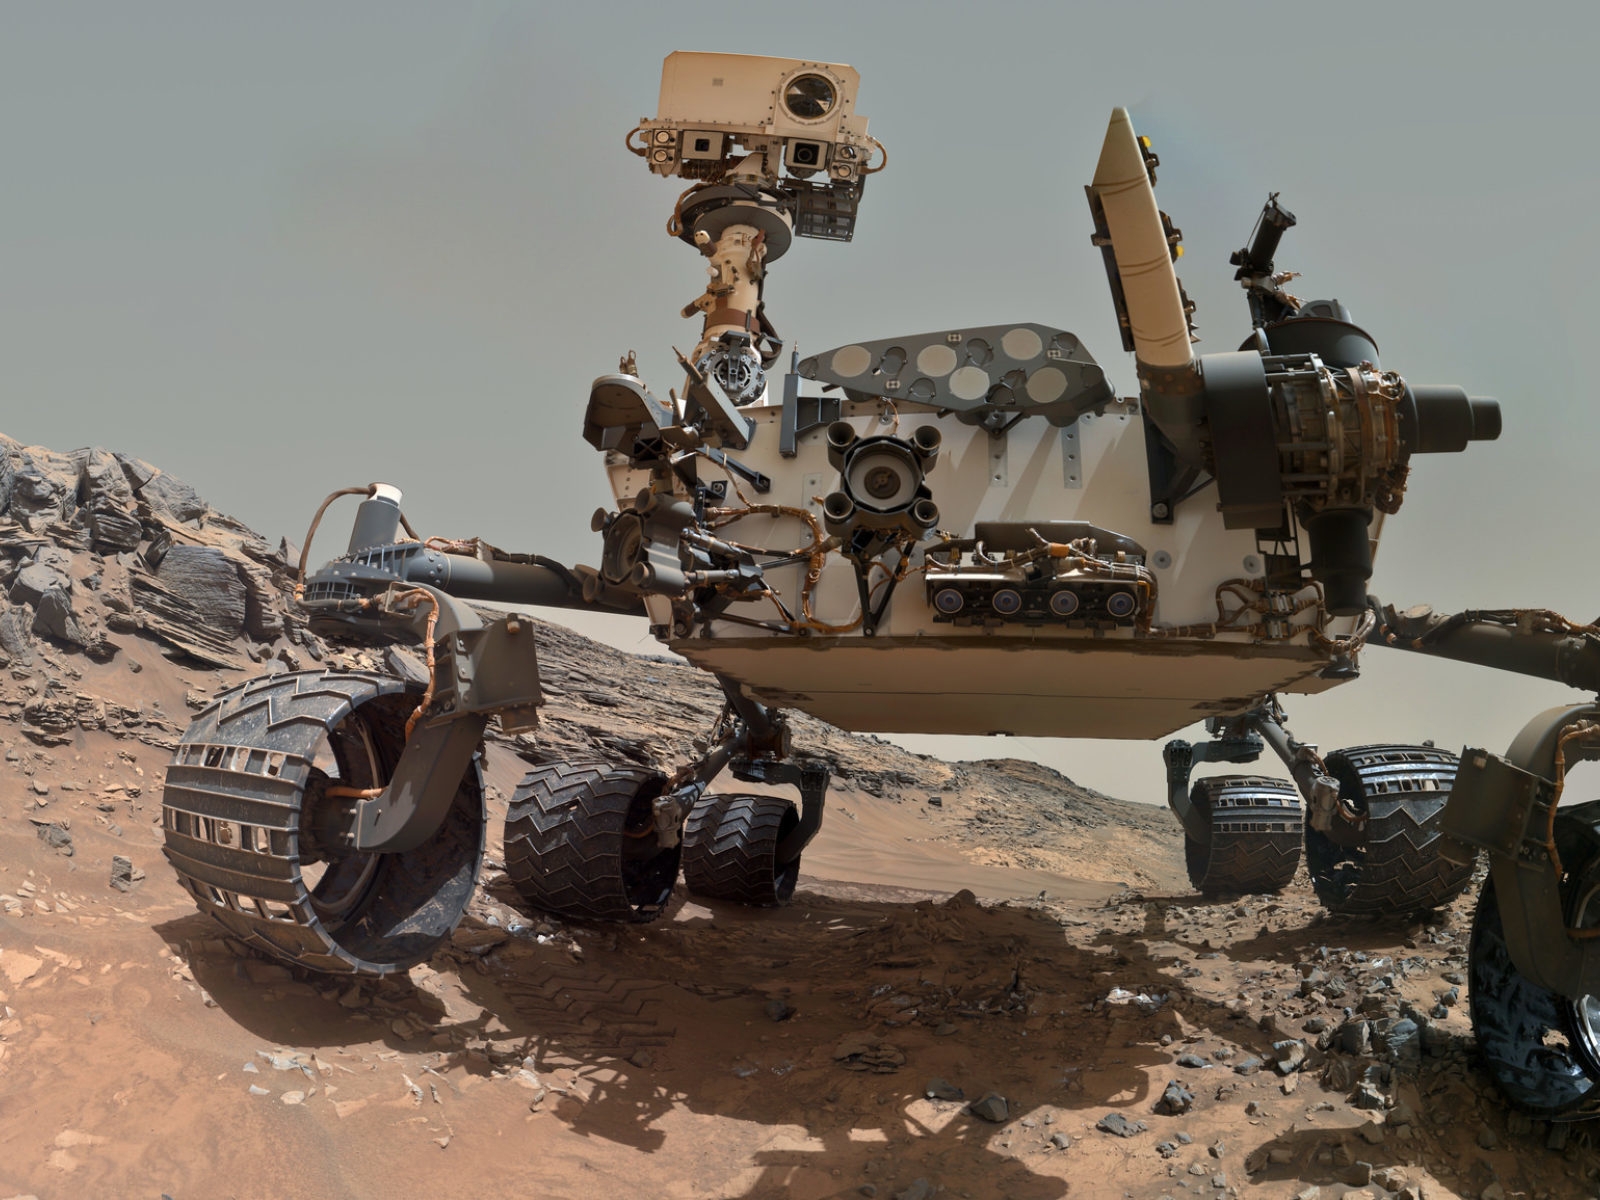 Image: Curiosity, Mars Rover, technology, surface, stones